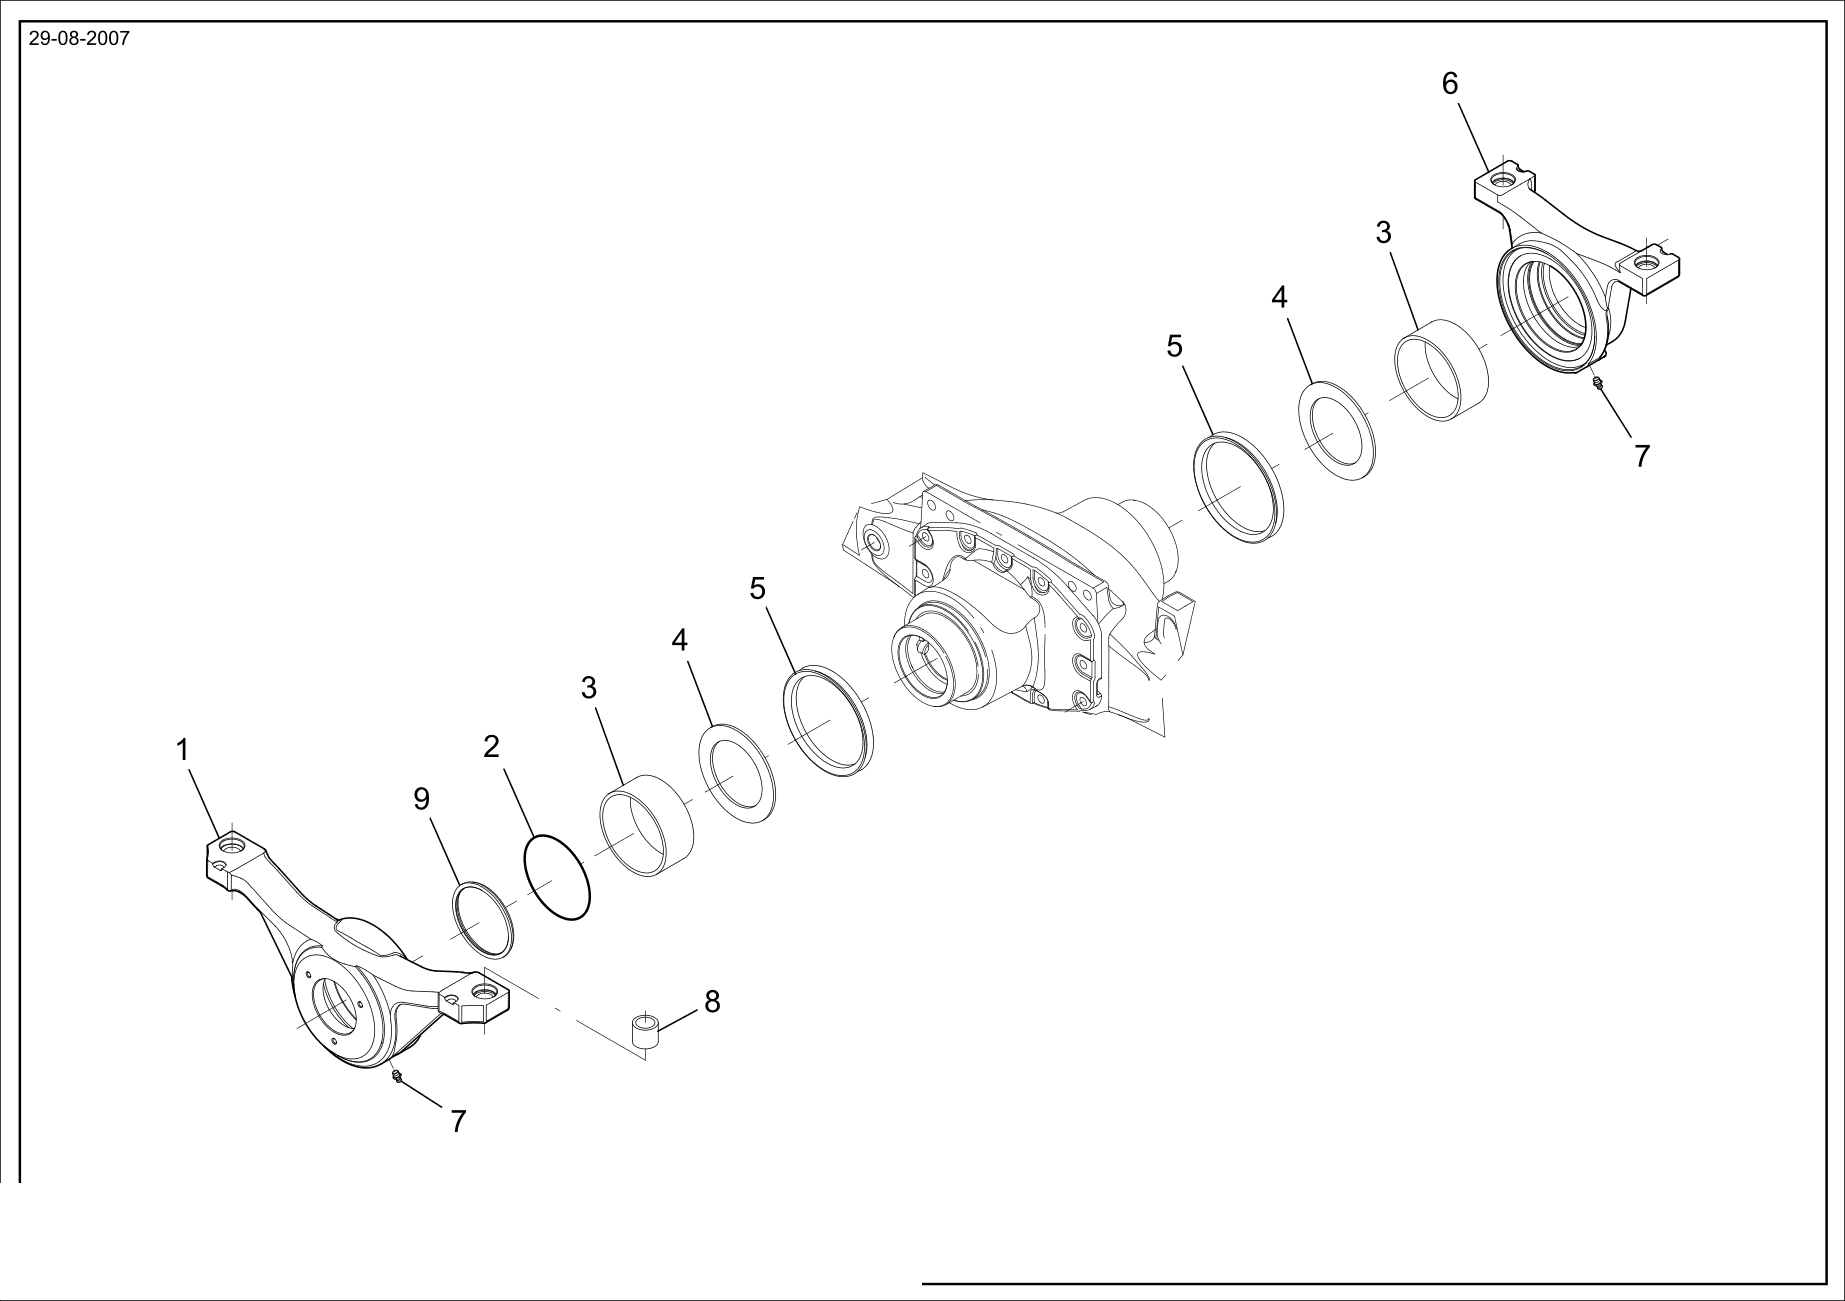 drawing for ERKUNT Y01481 - SUPPORT (figure 1)